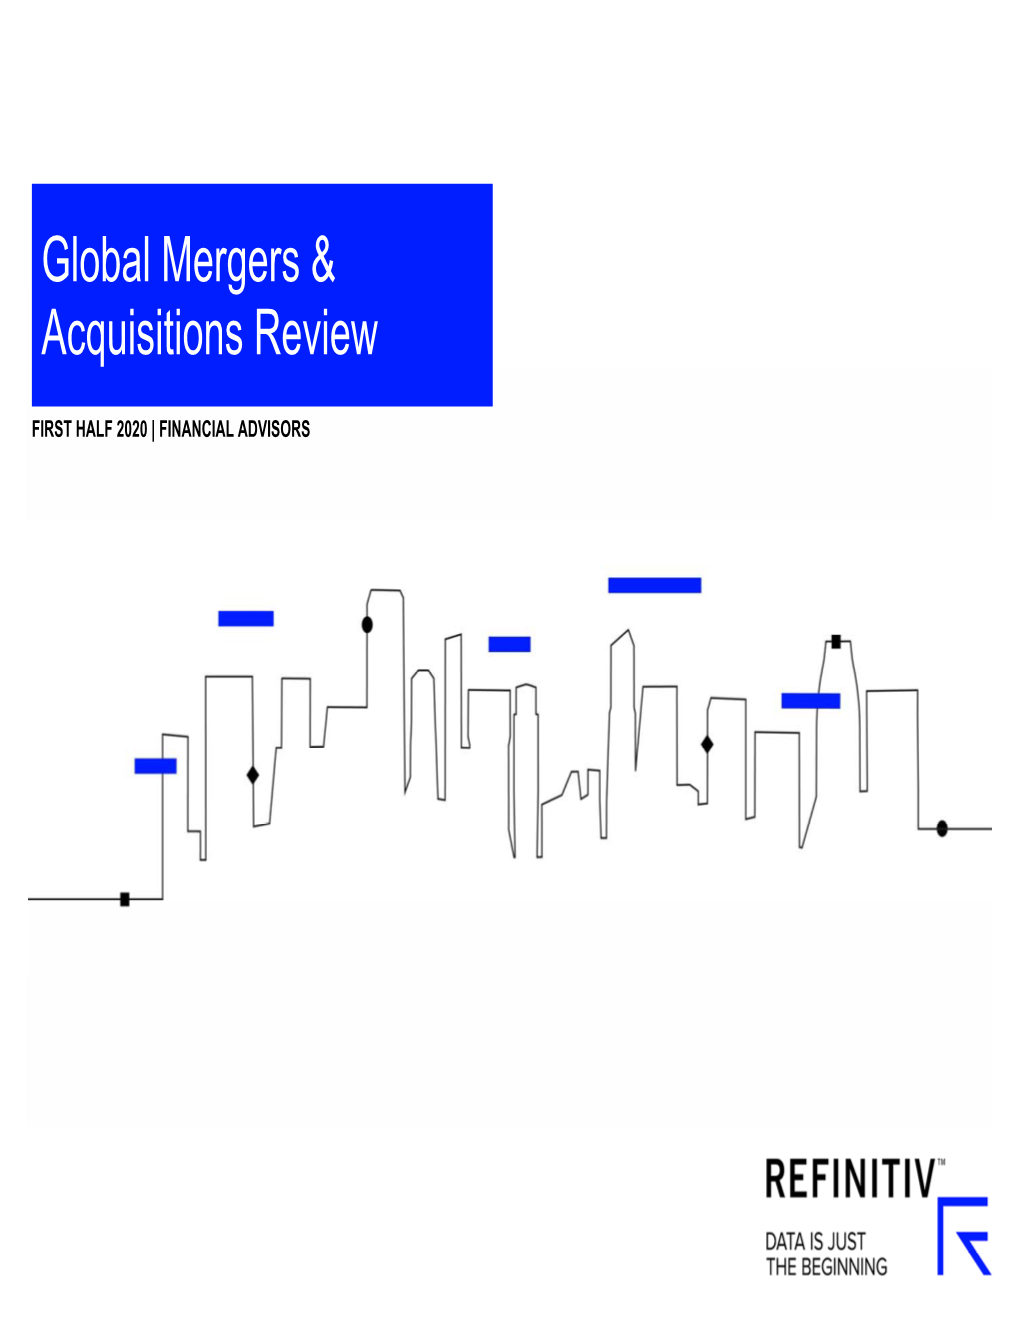 Global Mergers & Acquisitions Review